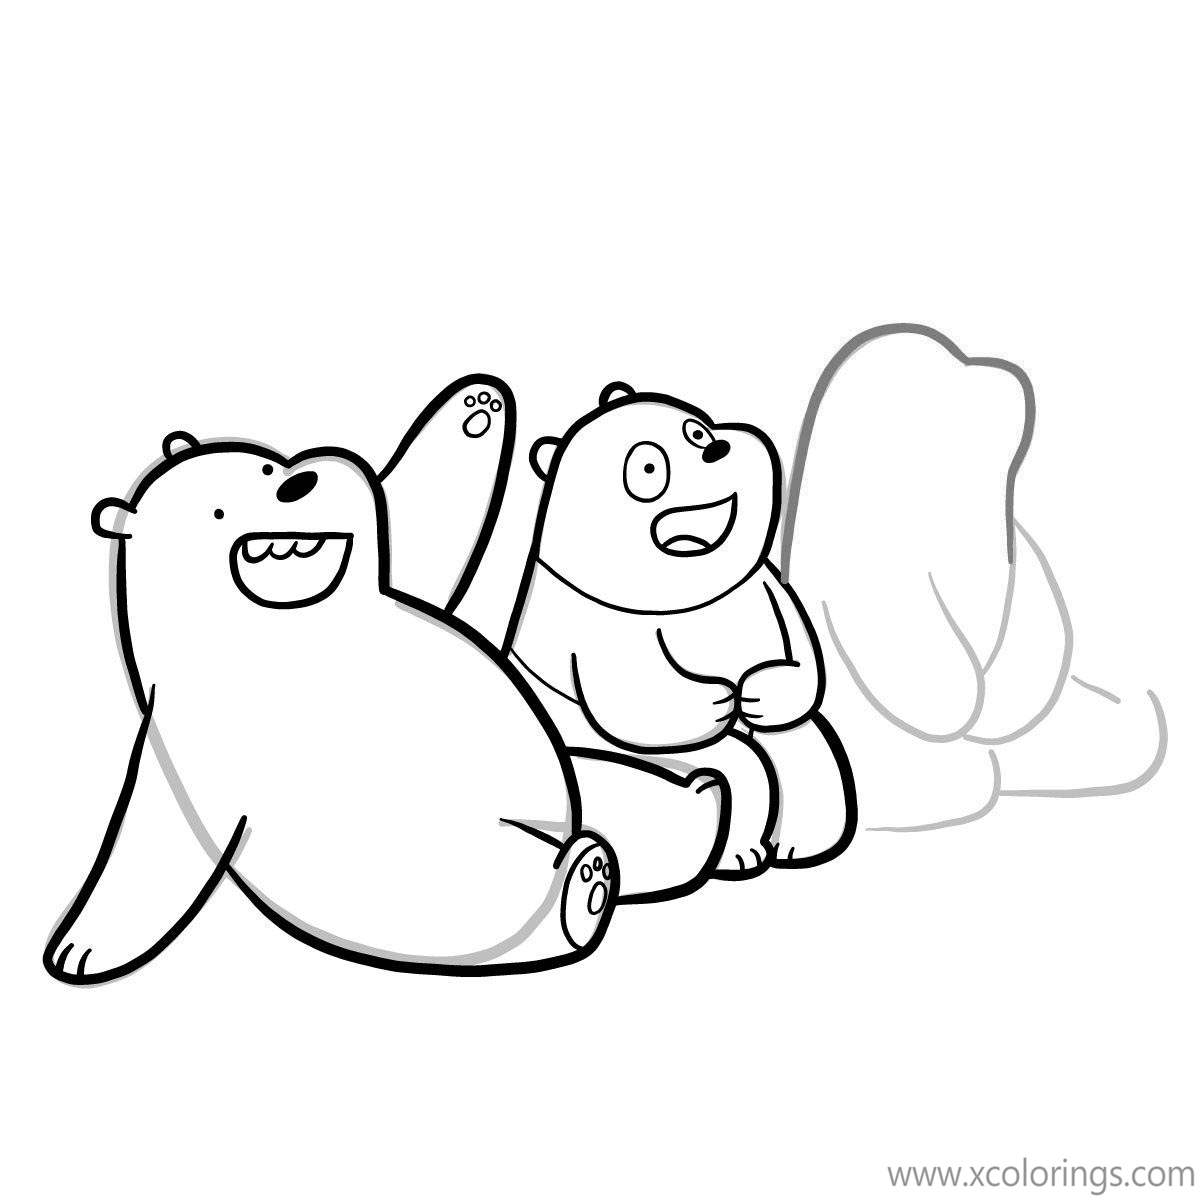 Free How to Draw We Bare Bears Coloring Pages printable